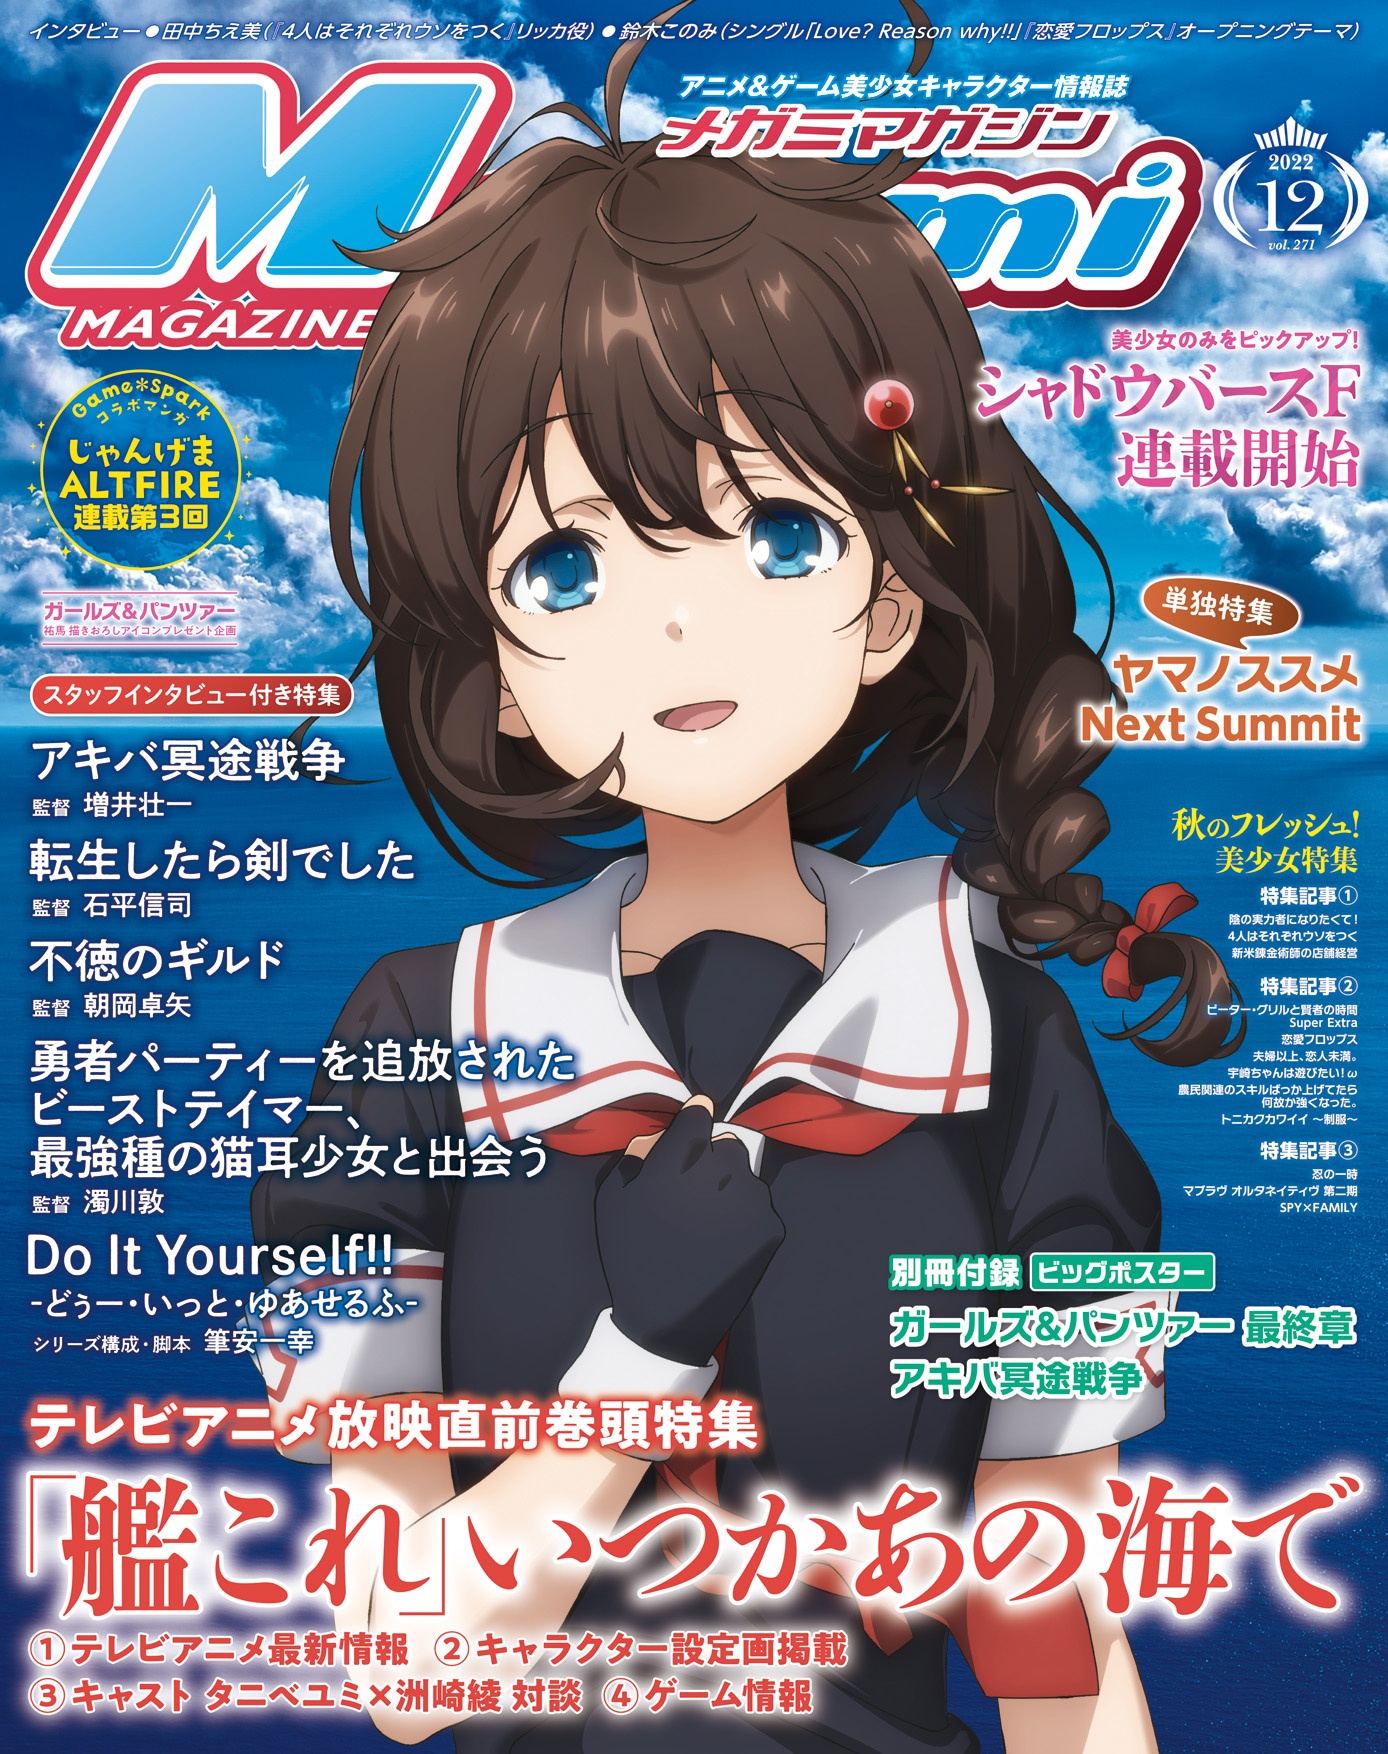 CDJapan : Megami MAGAZINE June 2022 Issue [Cover] Strike The Blood